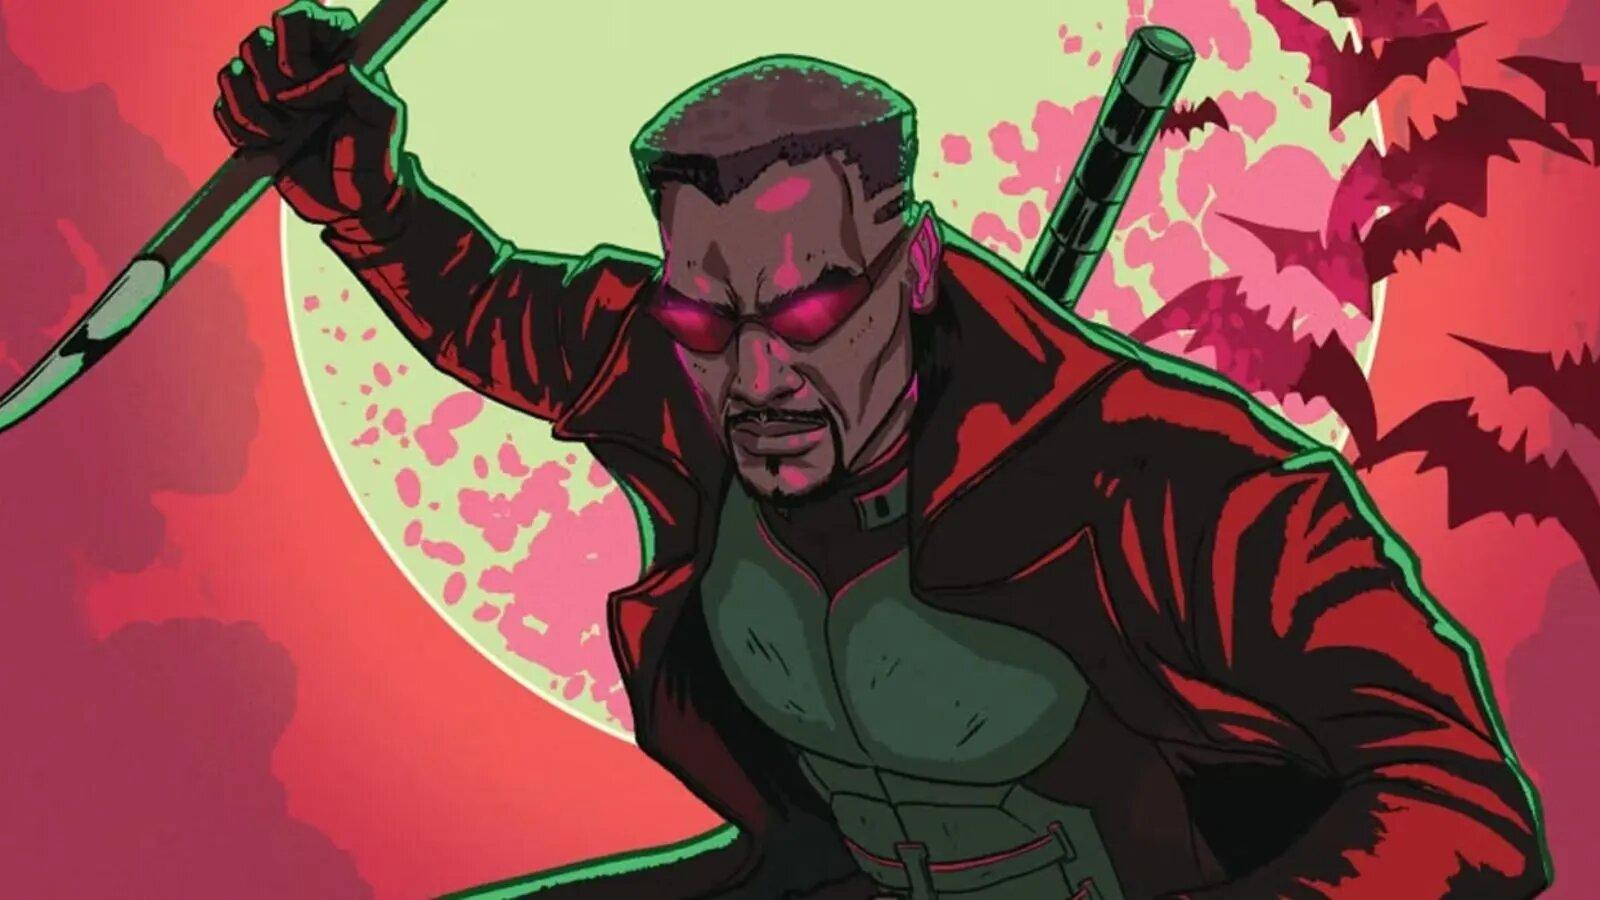 Blade from Marvel comics